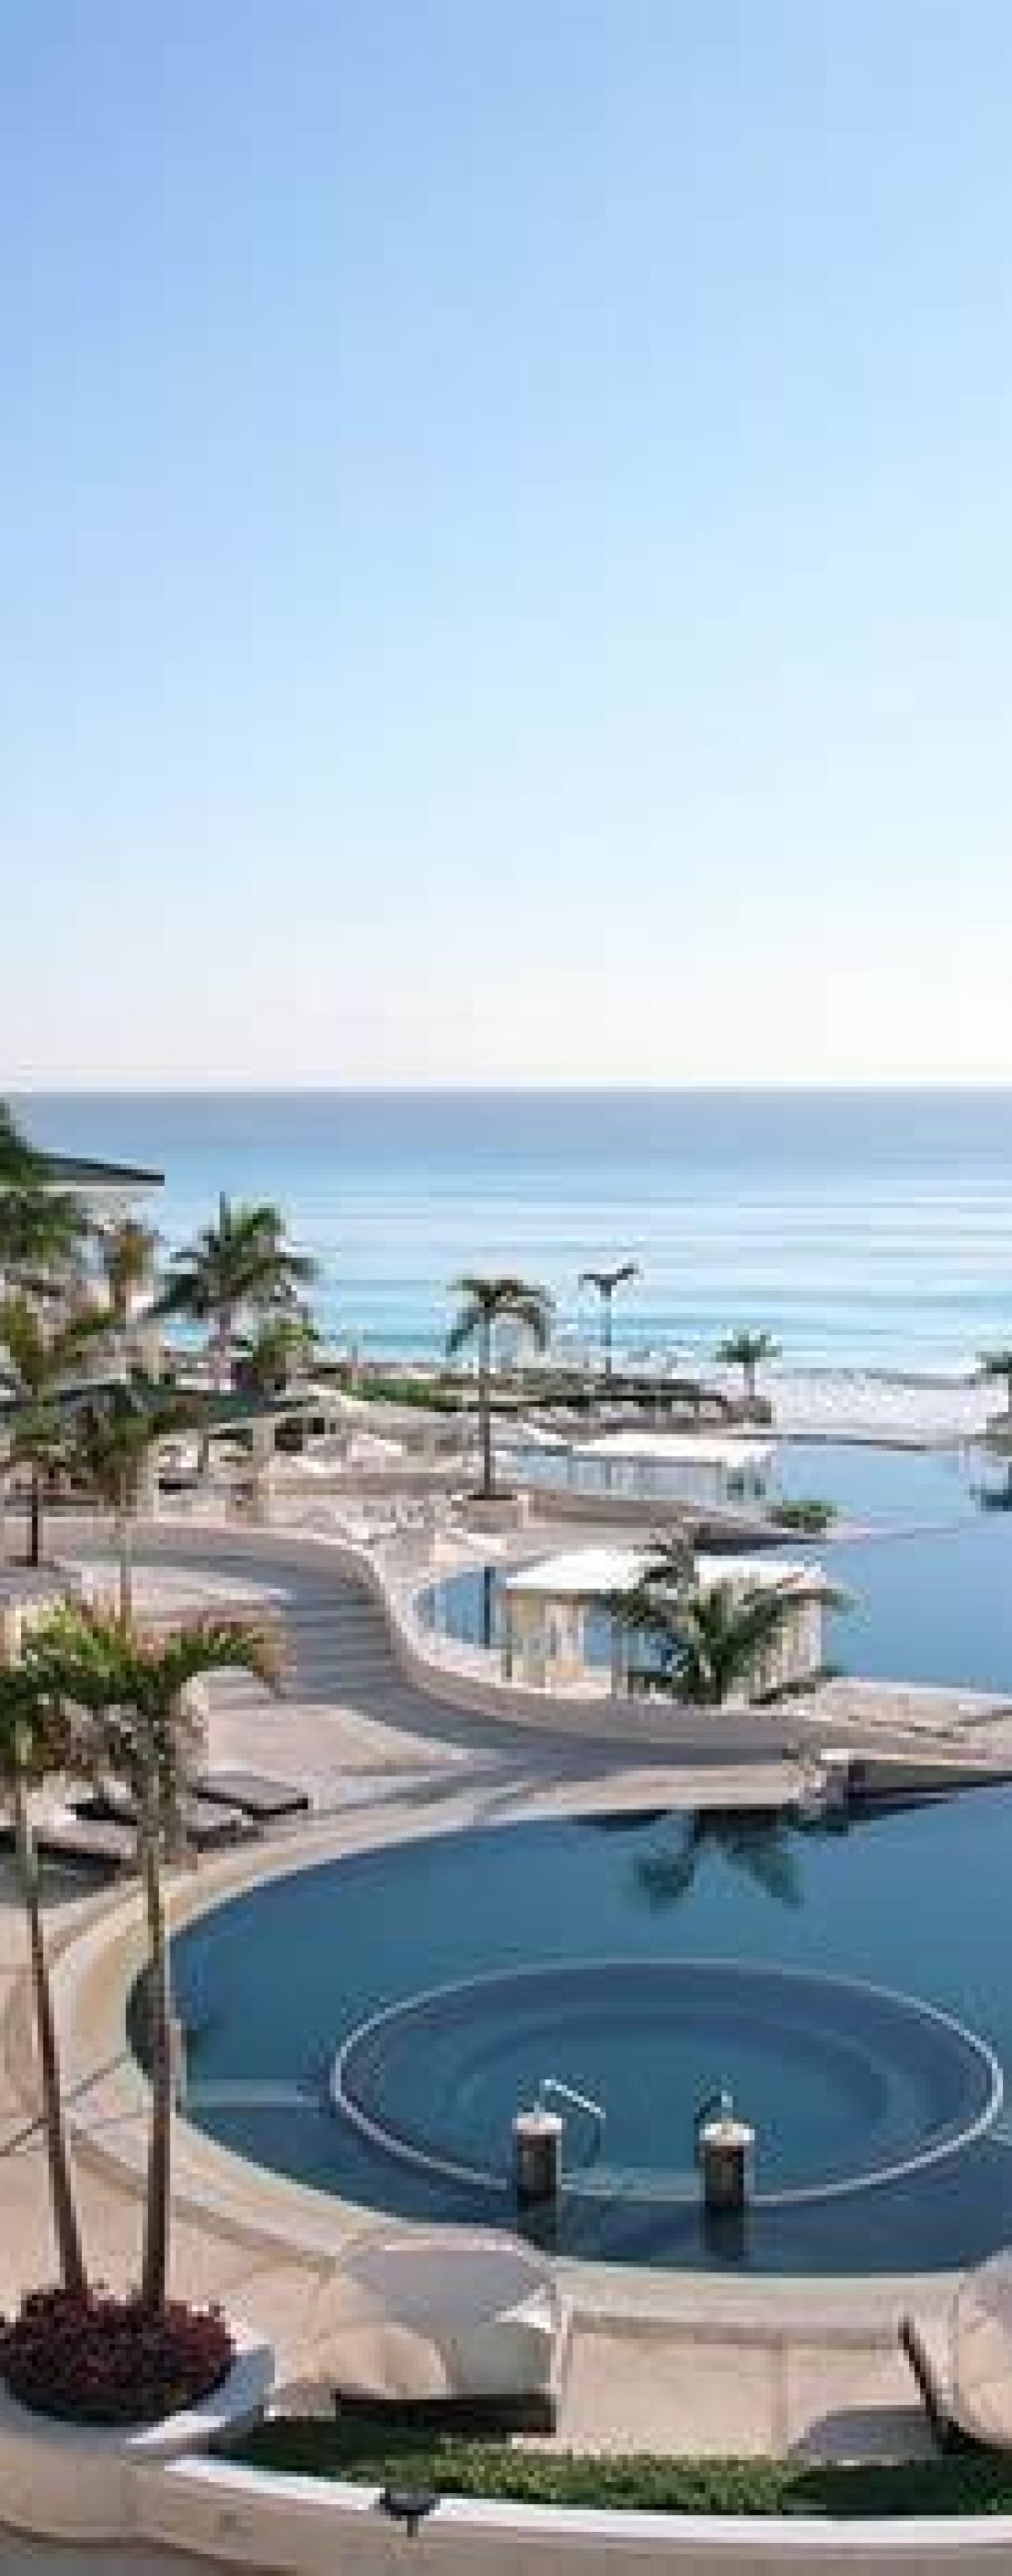 Sandos Cancun Lifestyle Resort All-Inclusive Ocean Front Vacation Club Promotion